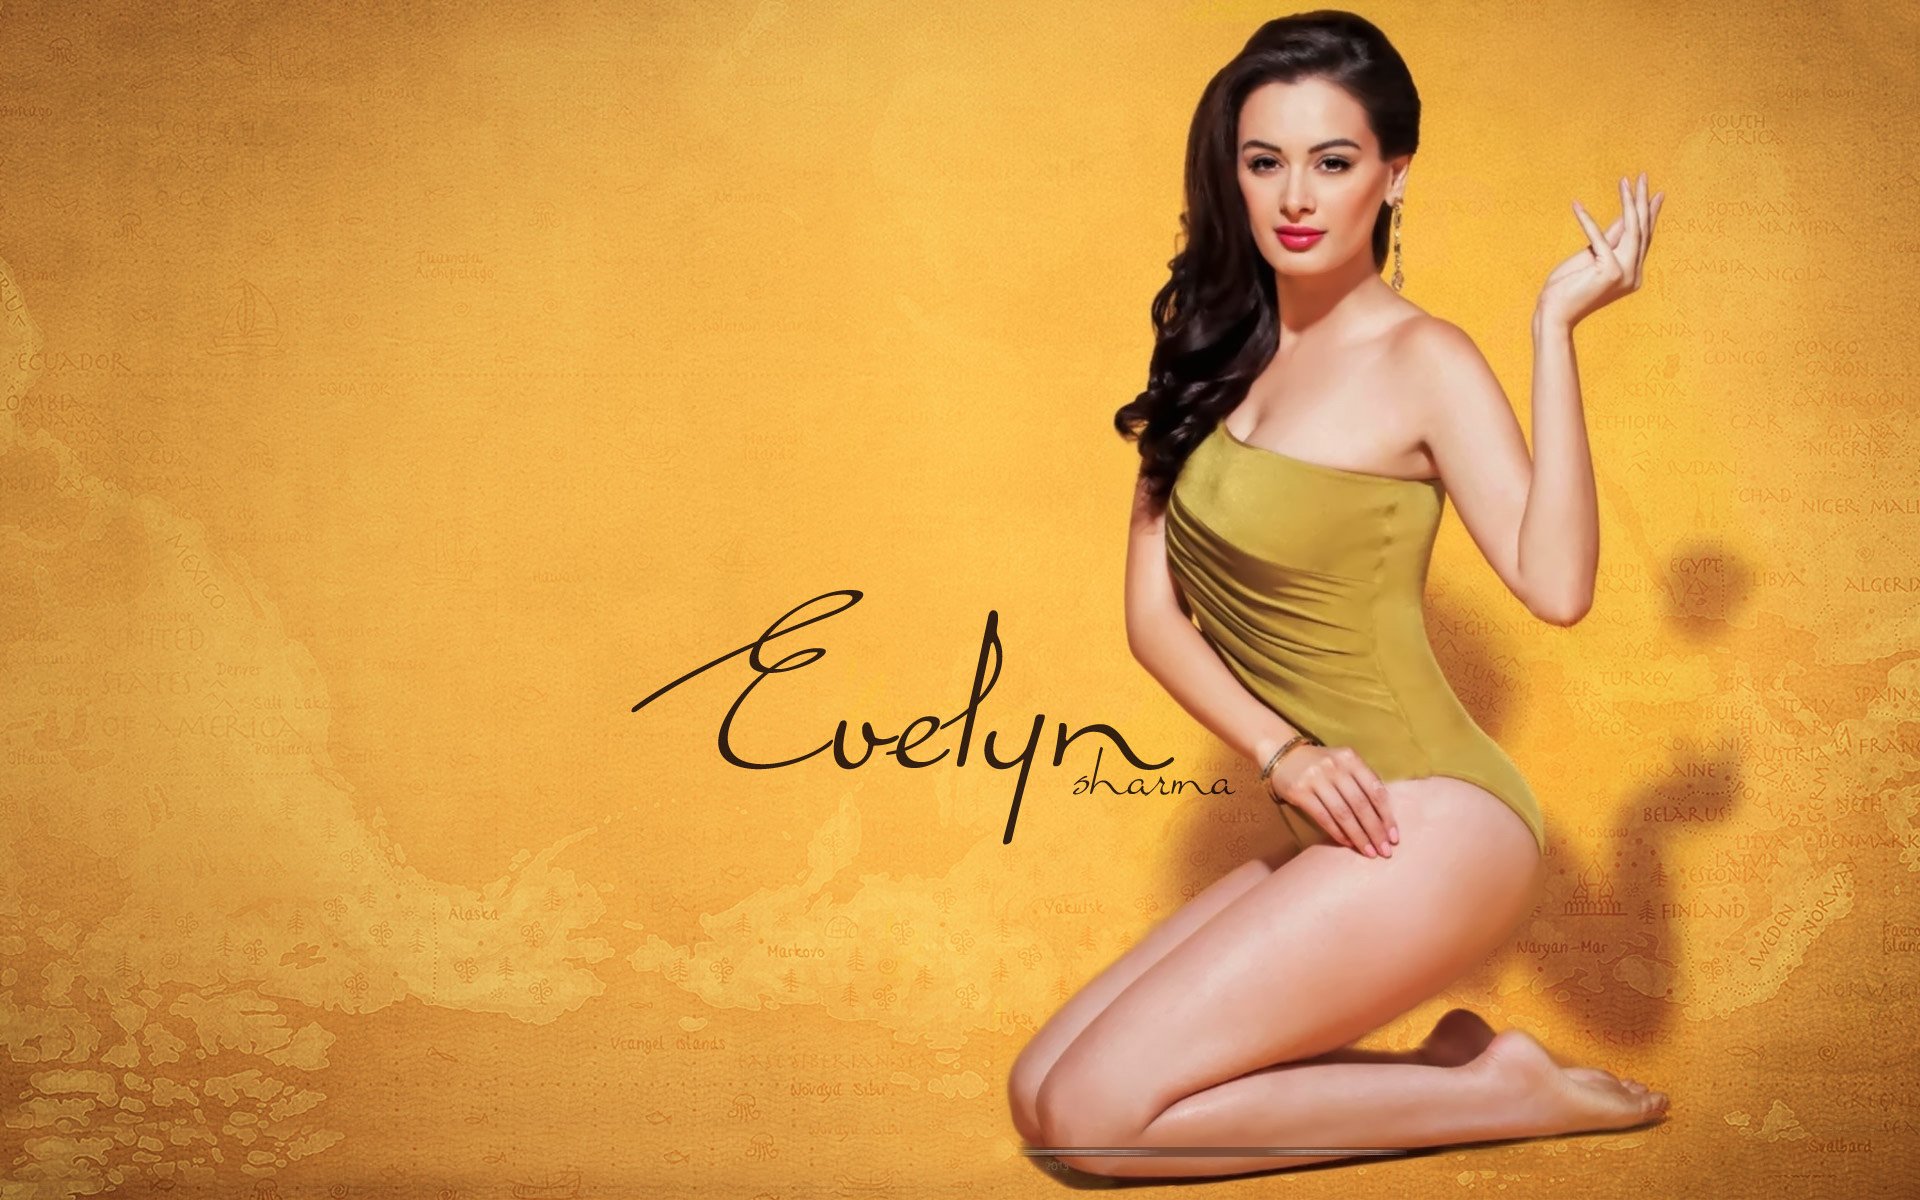 Evelyn Sharma German Indian Actress Model Babe 40